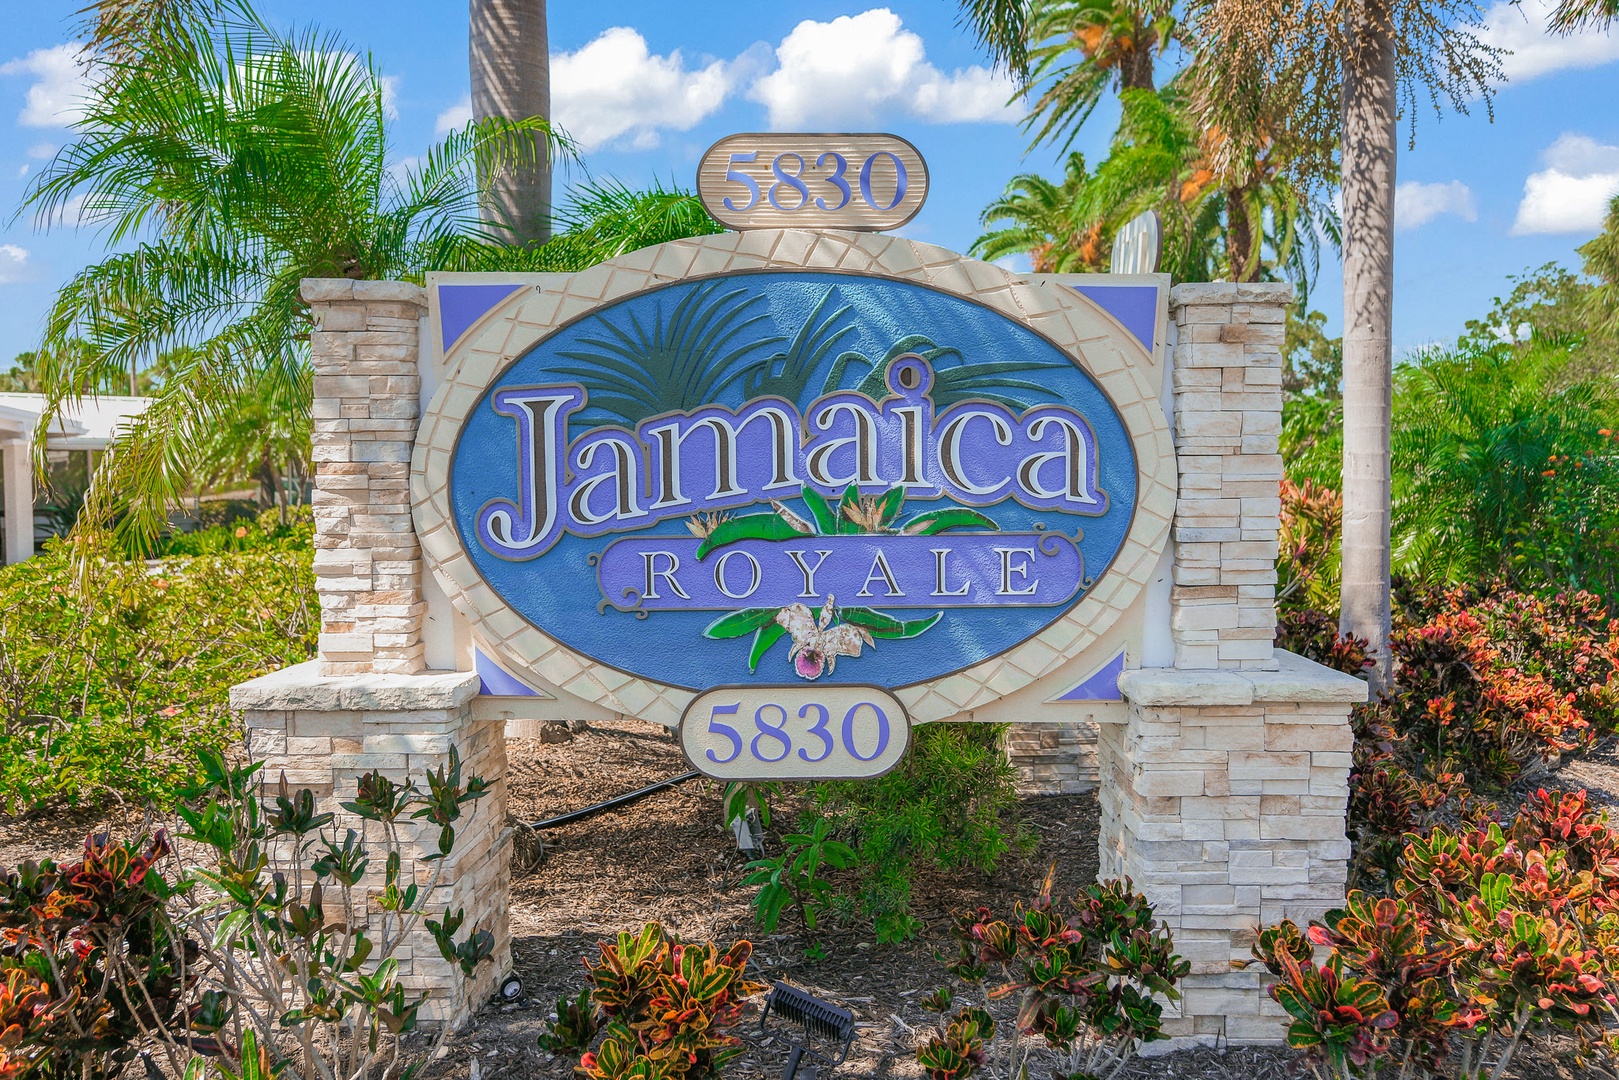 Jamaica Royale - Tropical Sands Accommodations